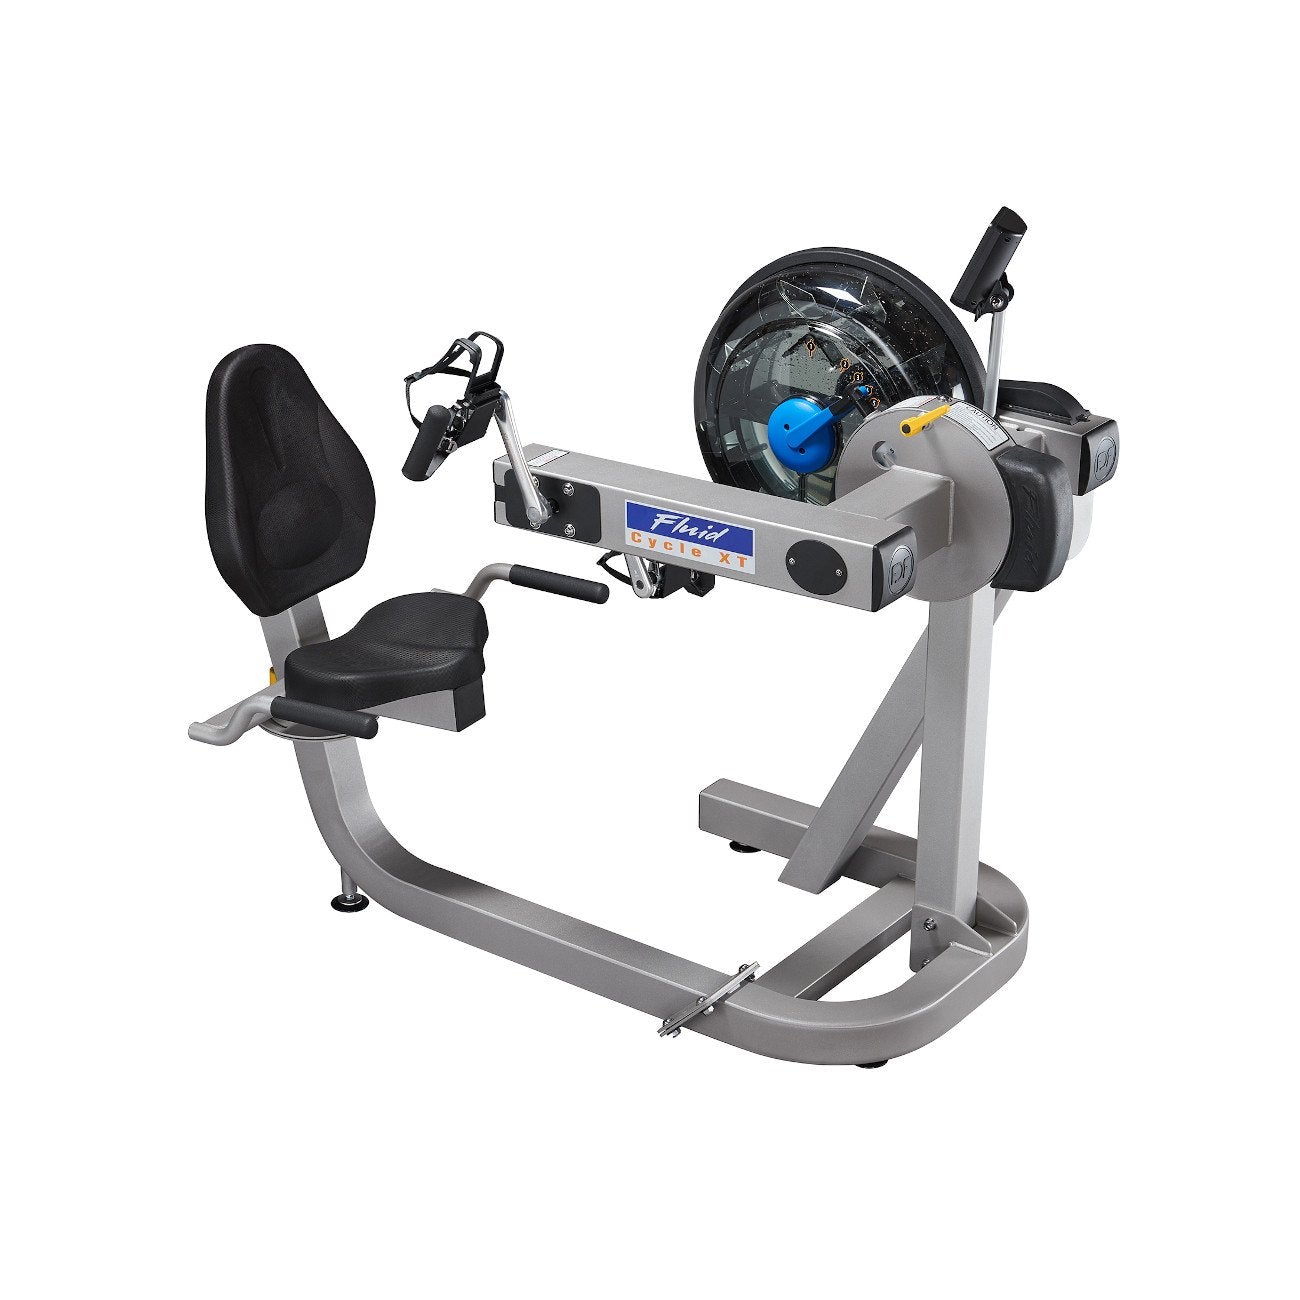 First Degree Fitness Fluid Exercise E720 Cycle XT Multi-Functional Cross Trainer